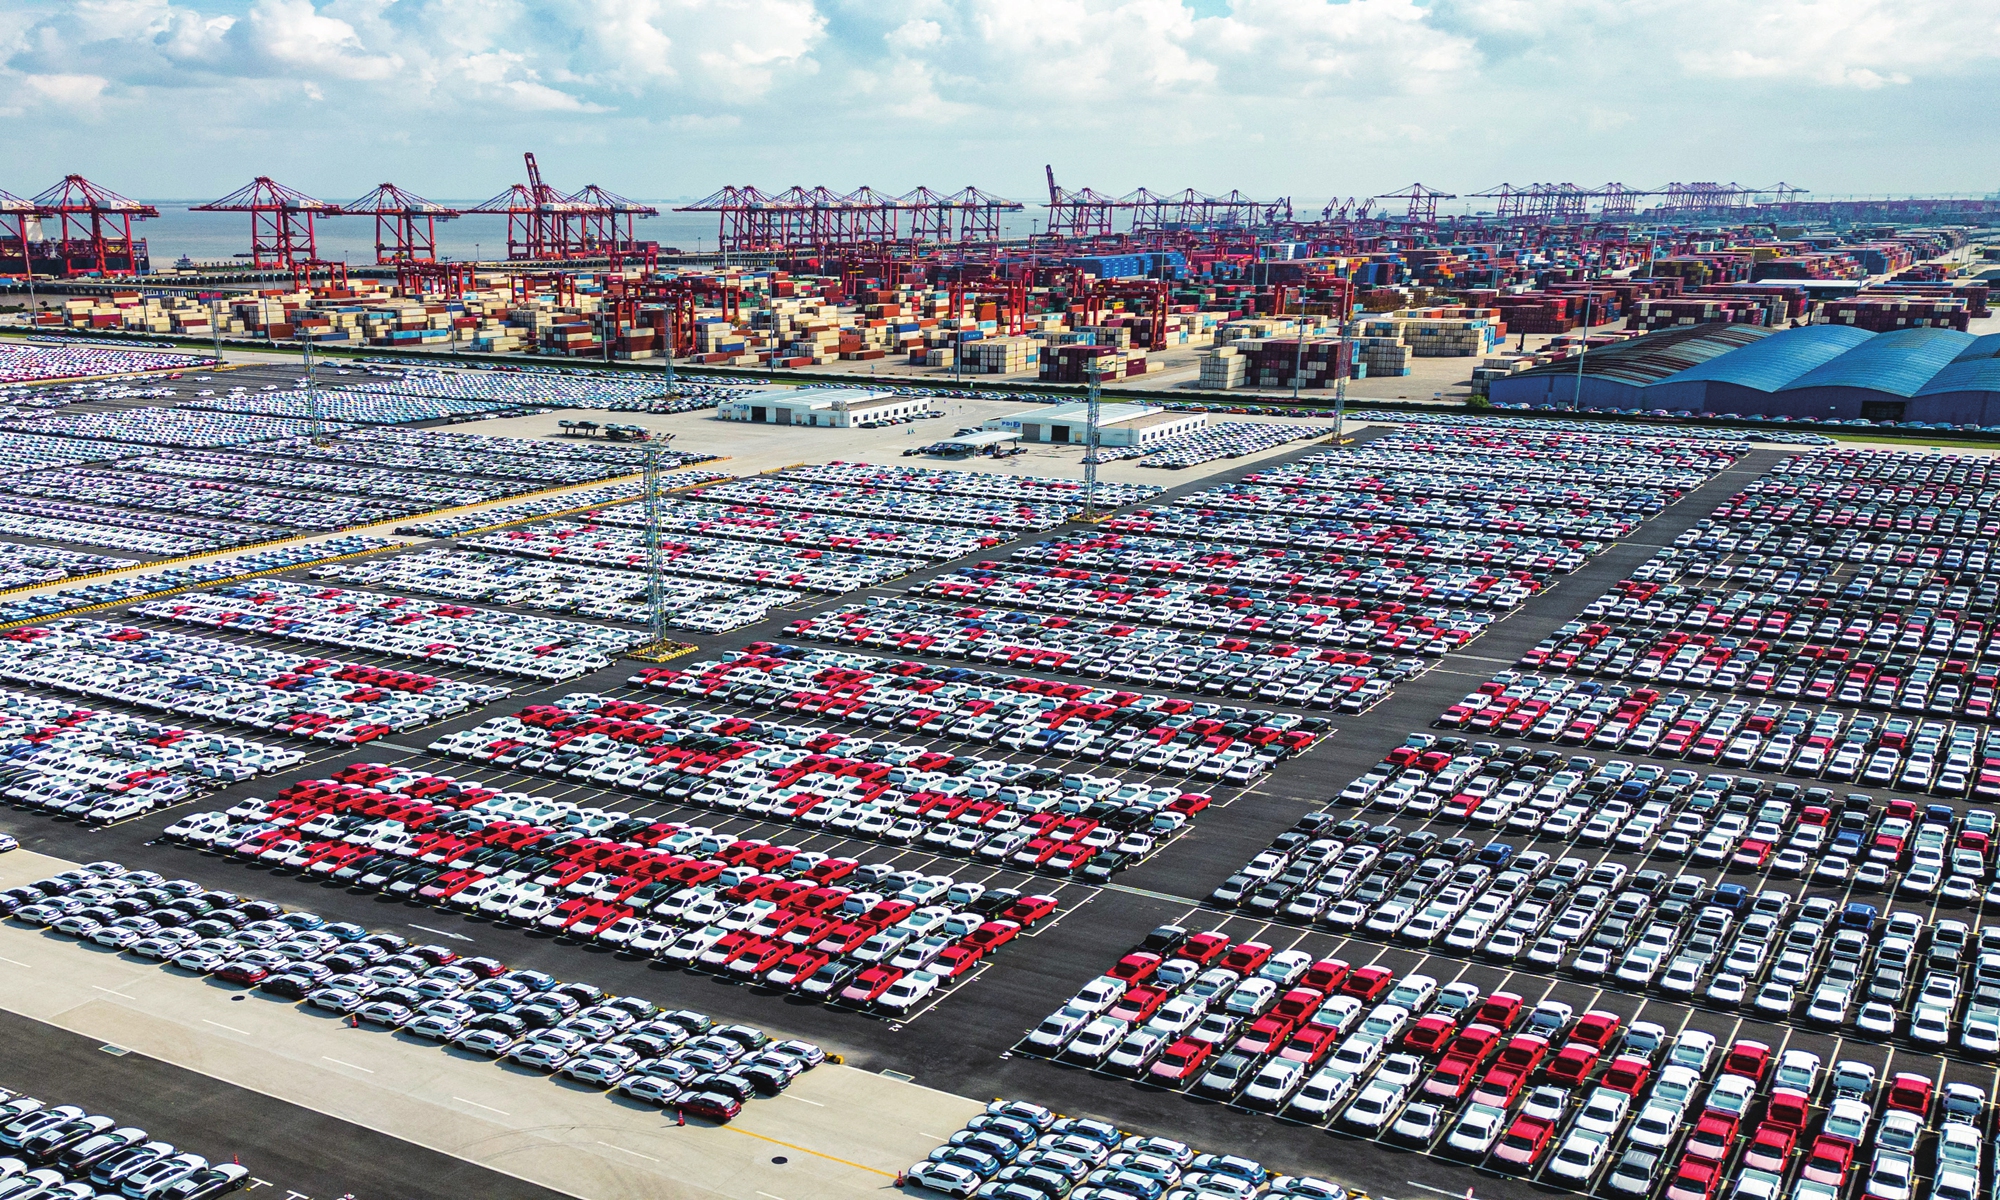 Automobiles are ready to be exported from the Taicang Port, East China's Jiangsu Province, on October 31, 2022. Cars handled by the port from January to September reached 218,700, of which 60,700 were exported. The car throughput in September reached 33,700, with 22,500 being exported, hitting a record high. Photo: cnsphoto. 